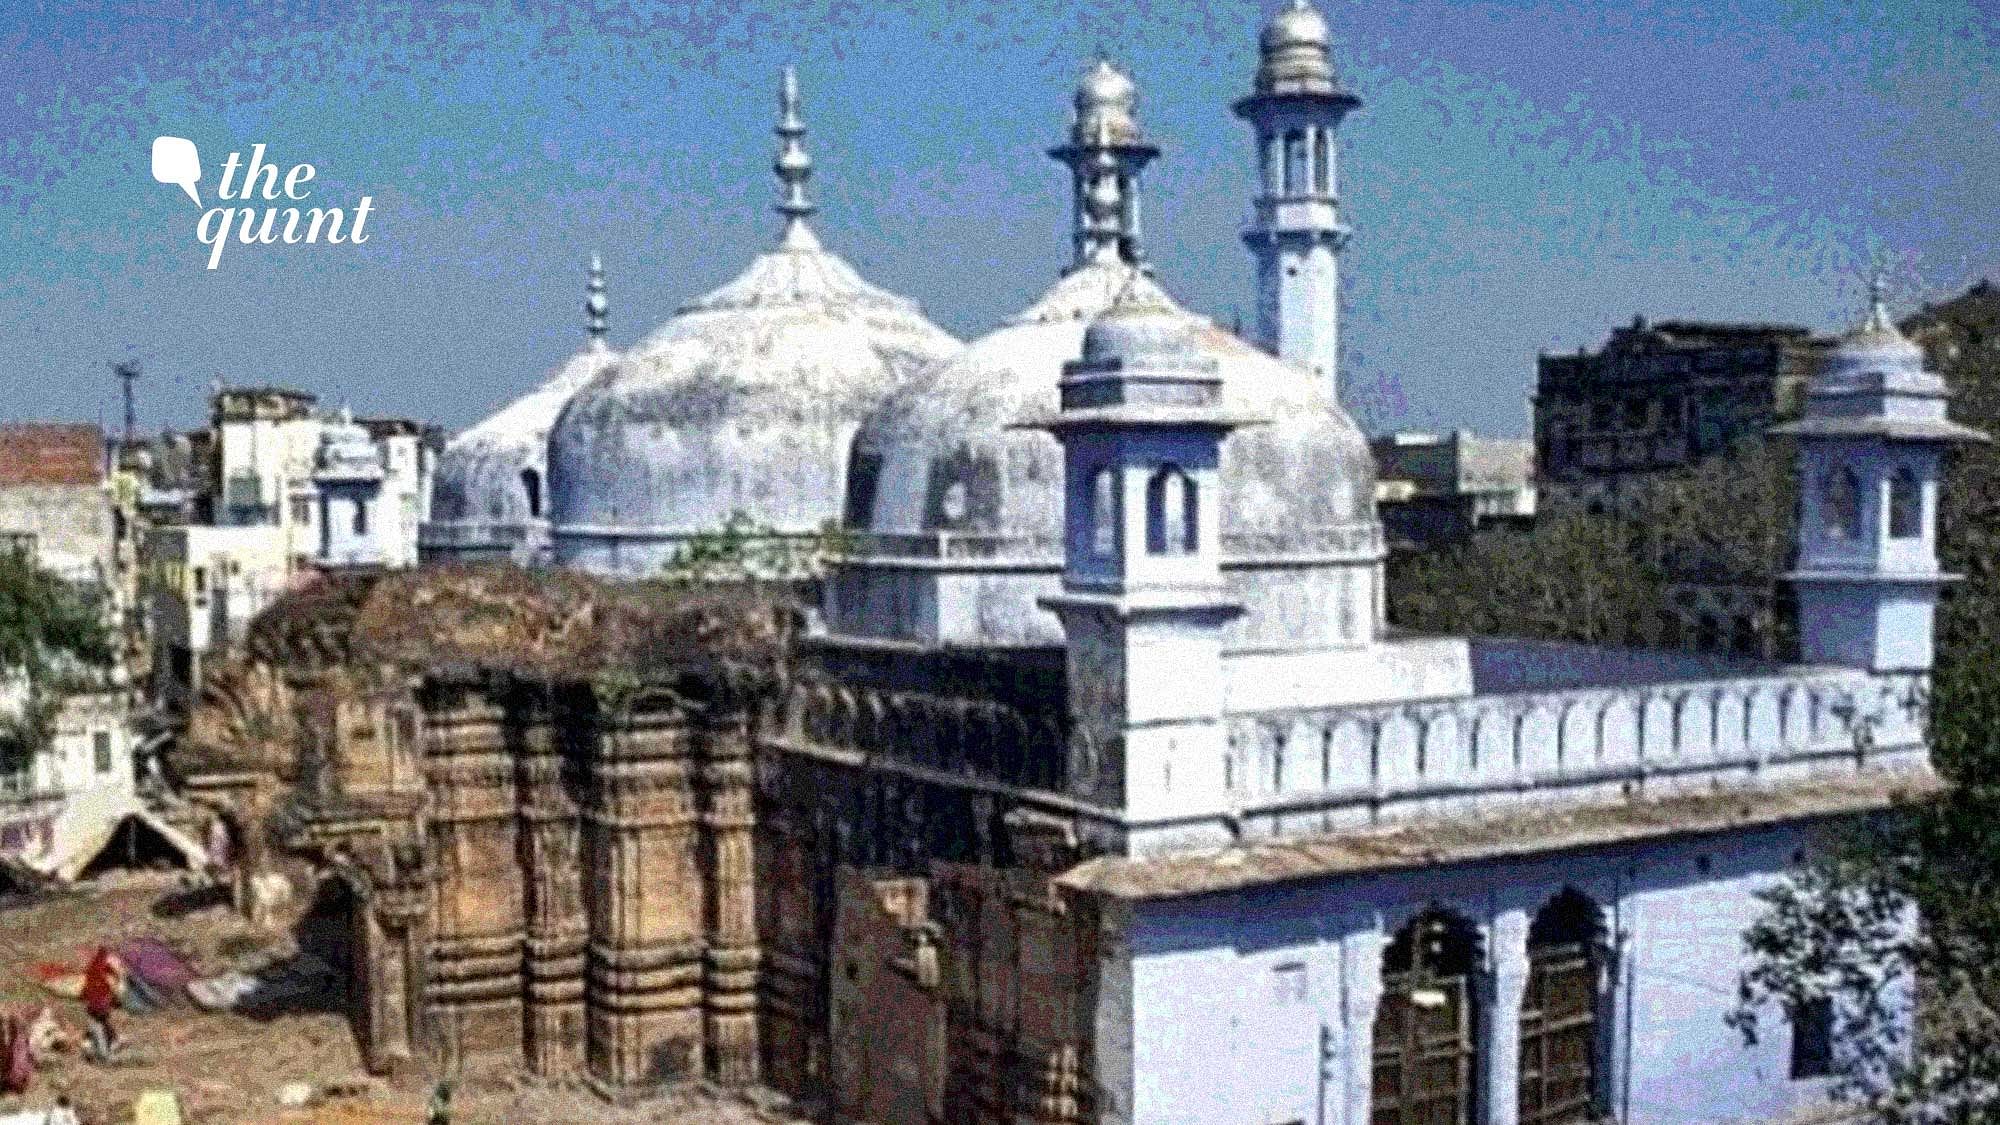 <div class="paragraphs"><p>A local court in Varanasi on Thursday, 12 May, delivered its verdict regarding the inspection of the <a href="https://www.thequint.com/topic/gyanvapi-mosque">Gyanvapi mosque complex</a> located near the Kashi Vishwanath temple and decided that the mosque's videography will continue.</p></div>